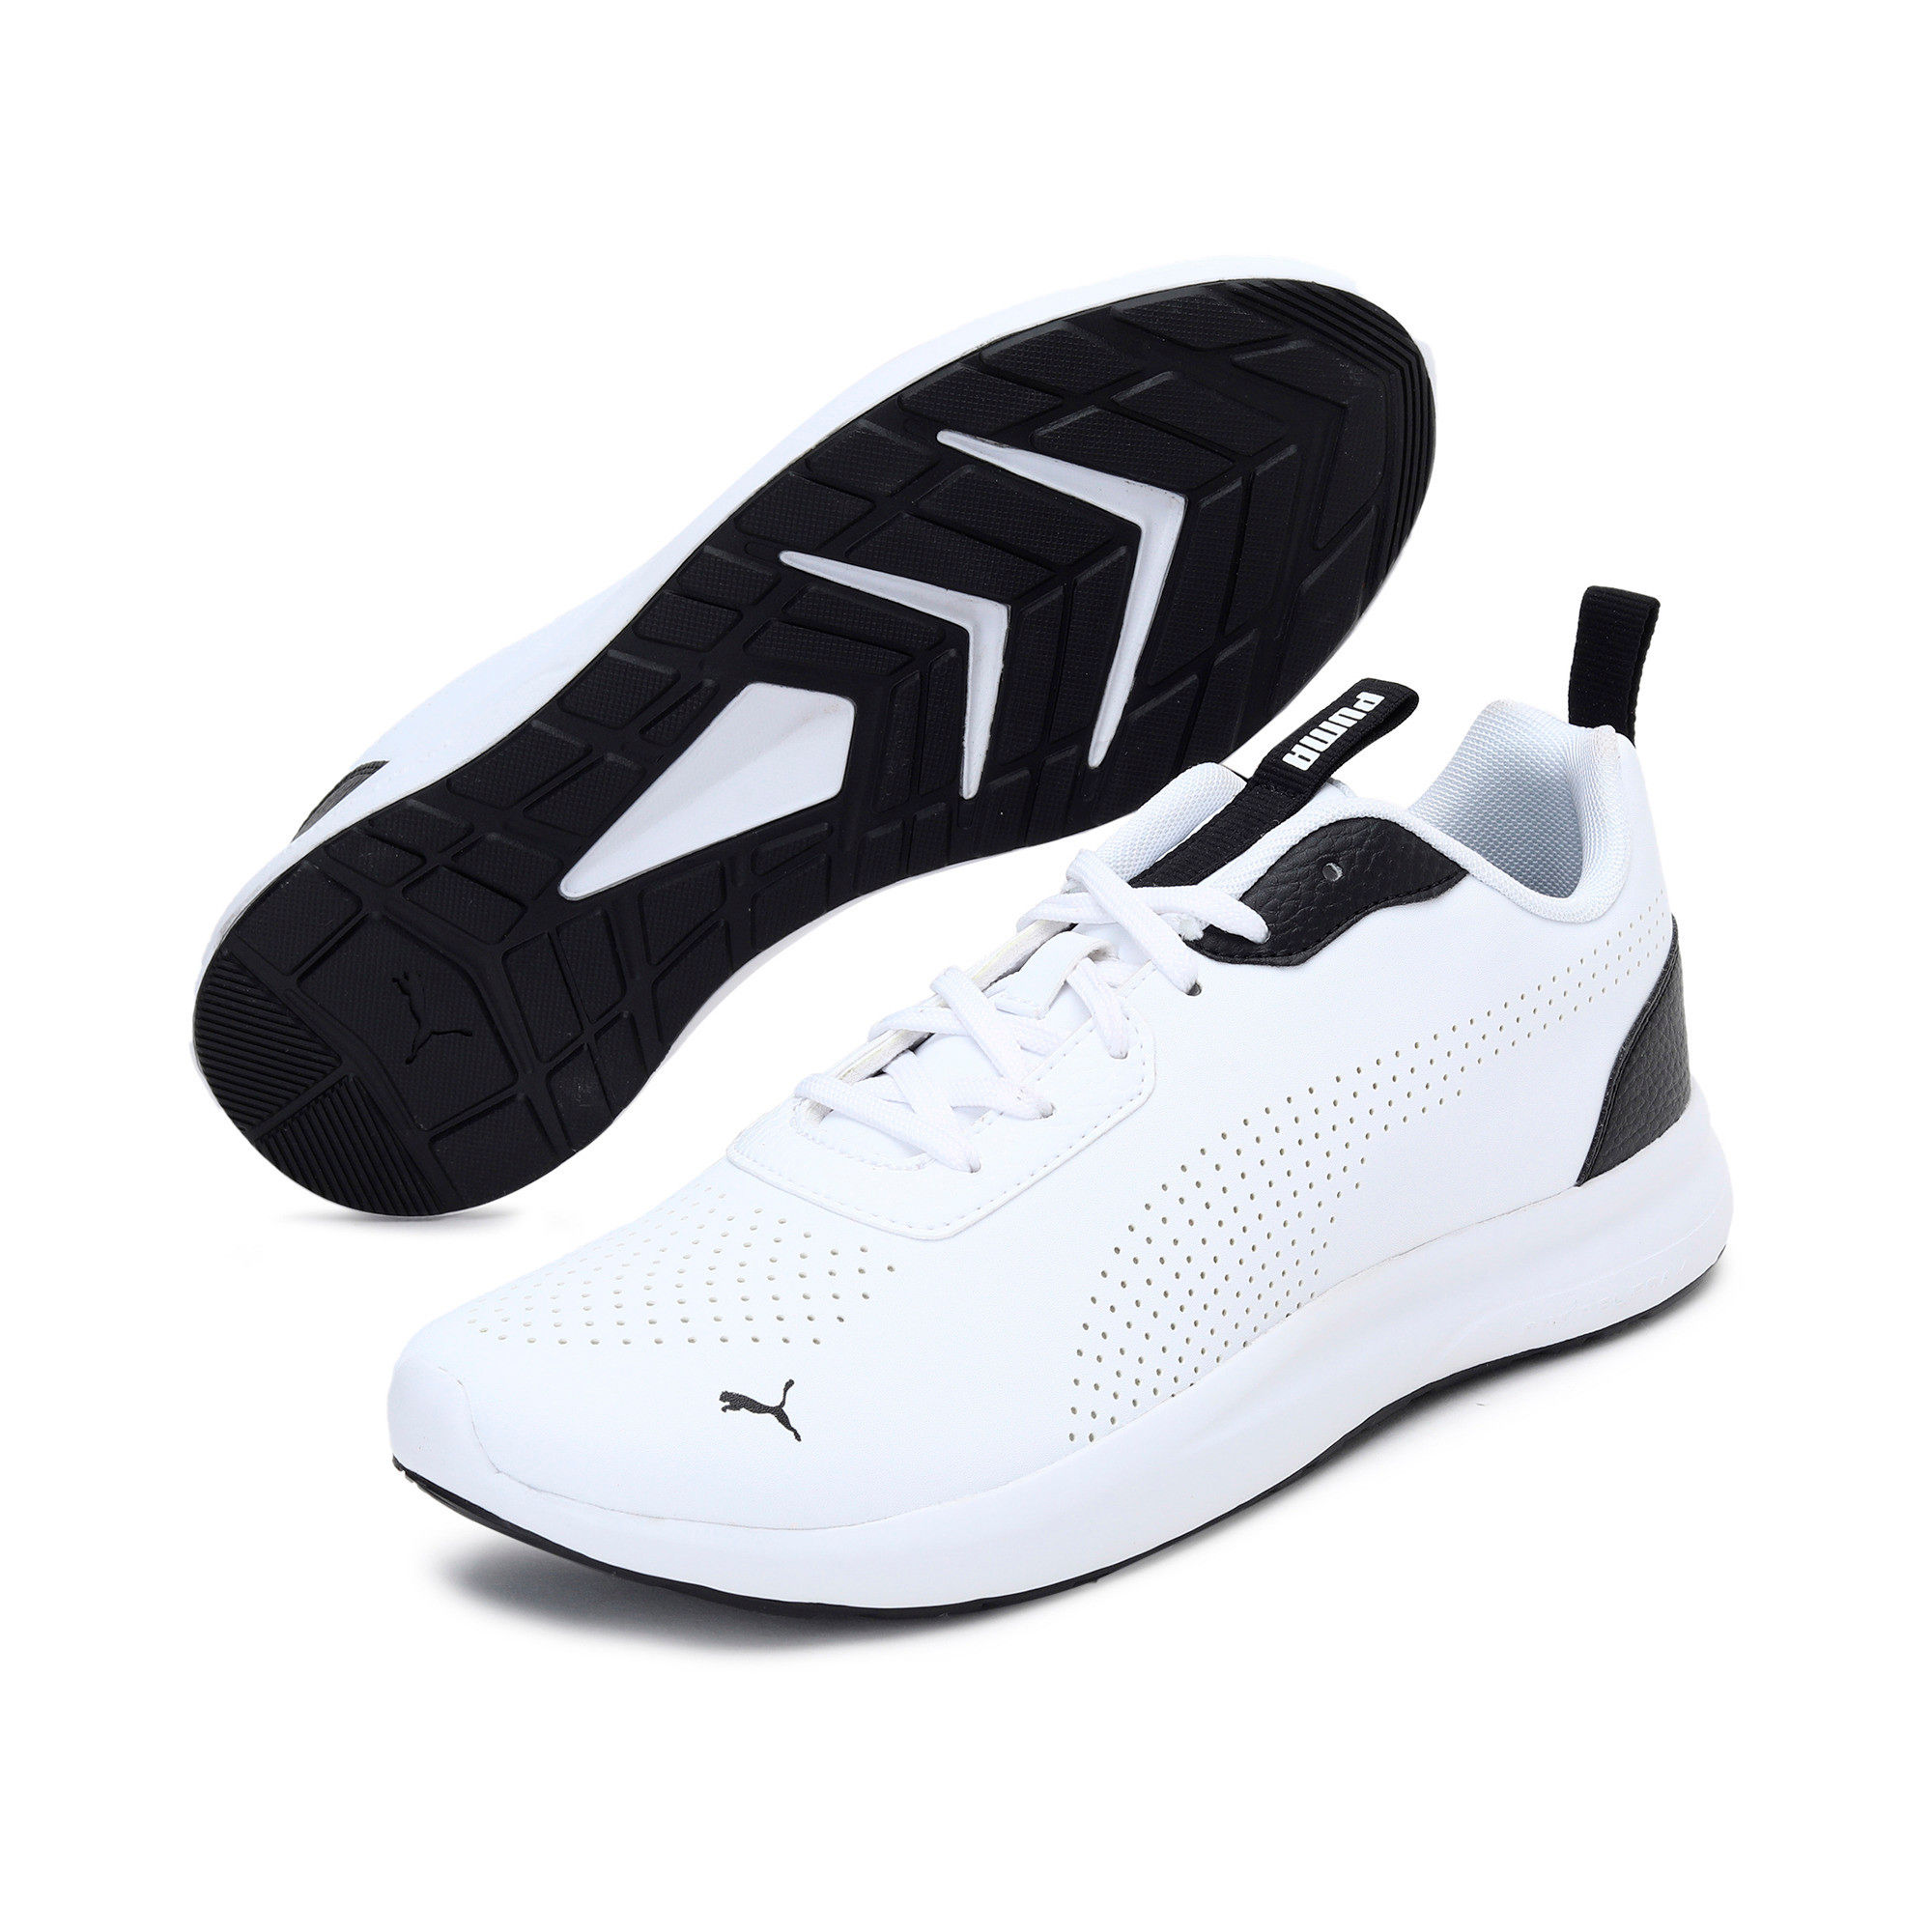 Puma Perforated Low Men's Idp White Shoes: Buy Puma Perforated Low Men ...